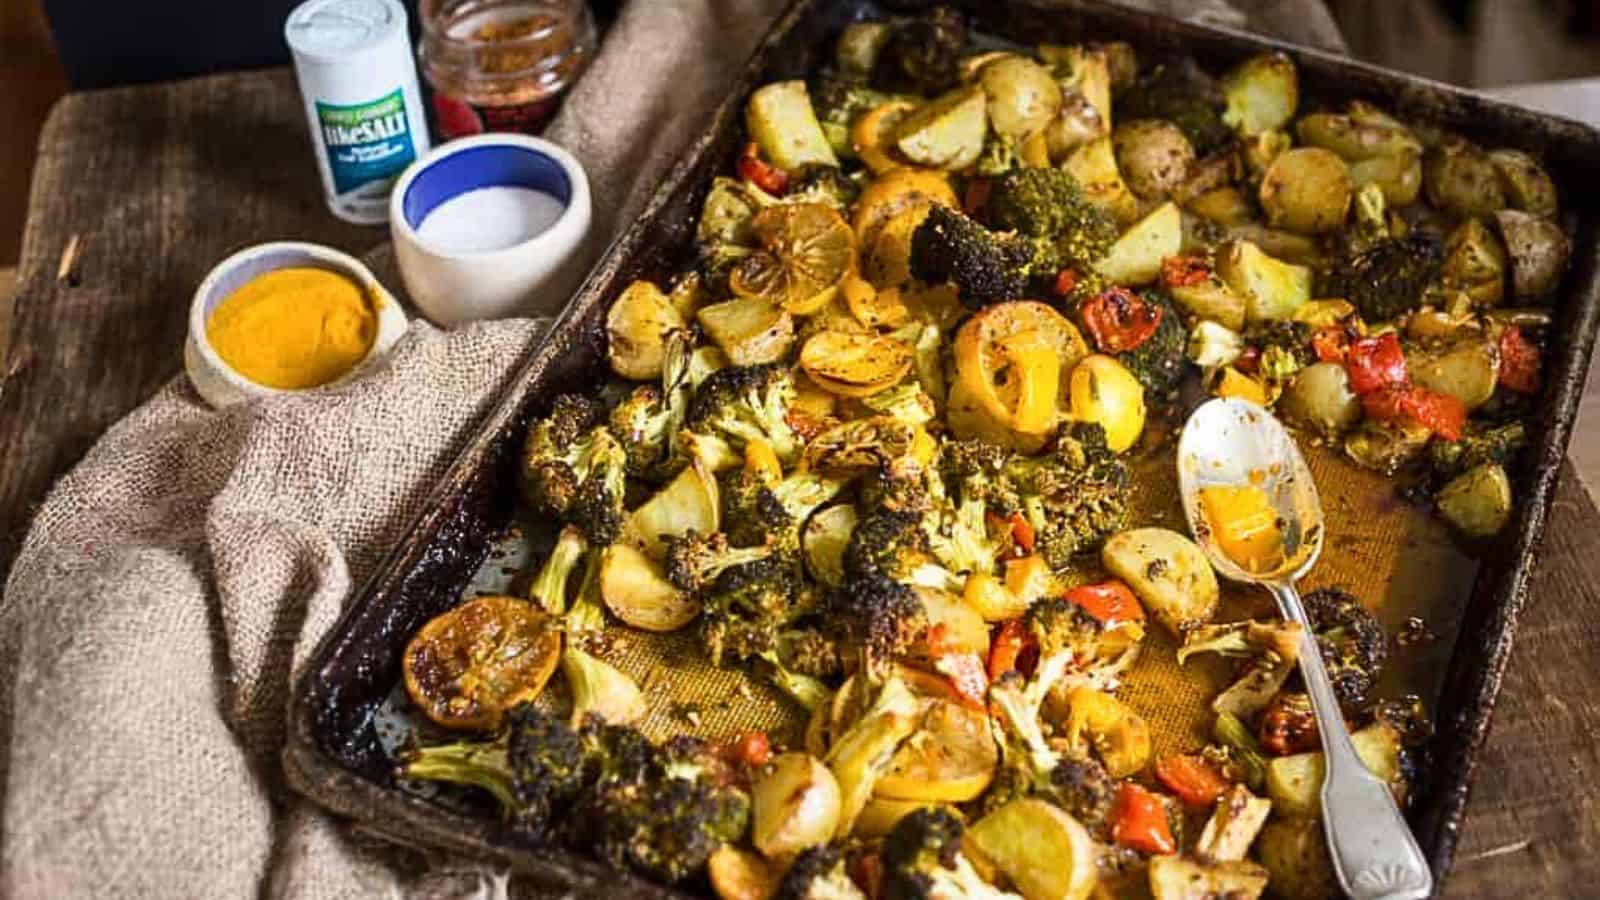 A baking pan full of vegetables and a spoon.